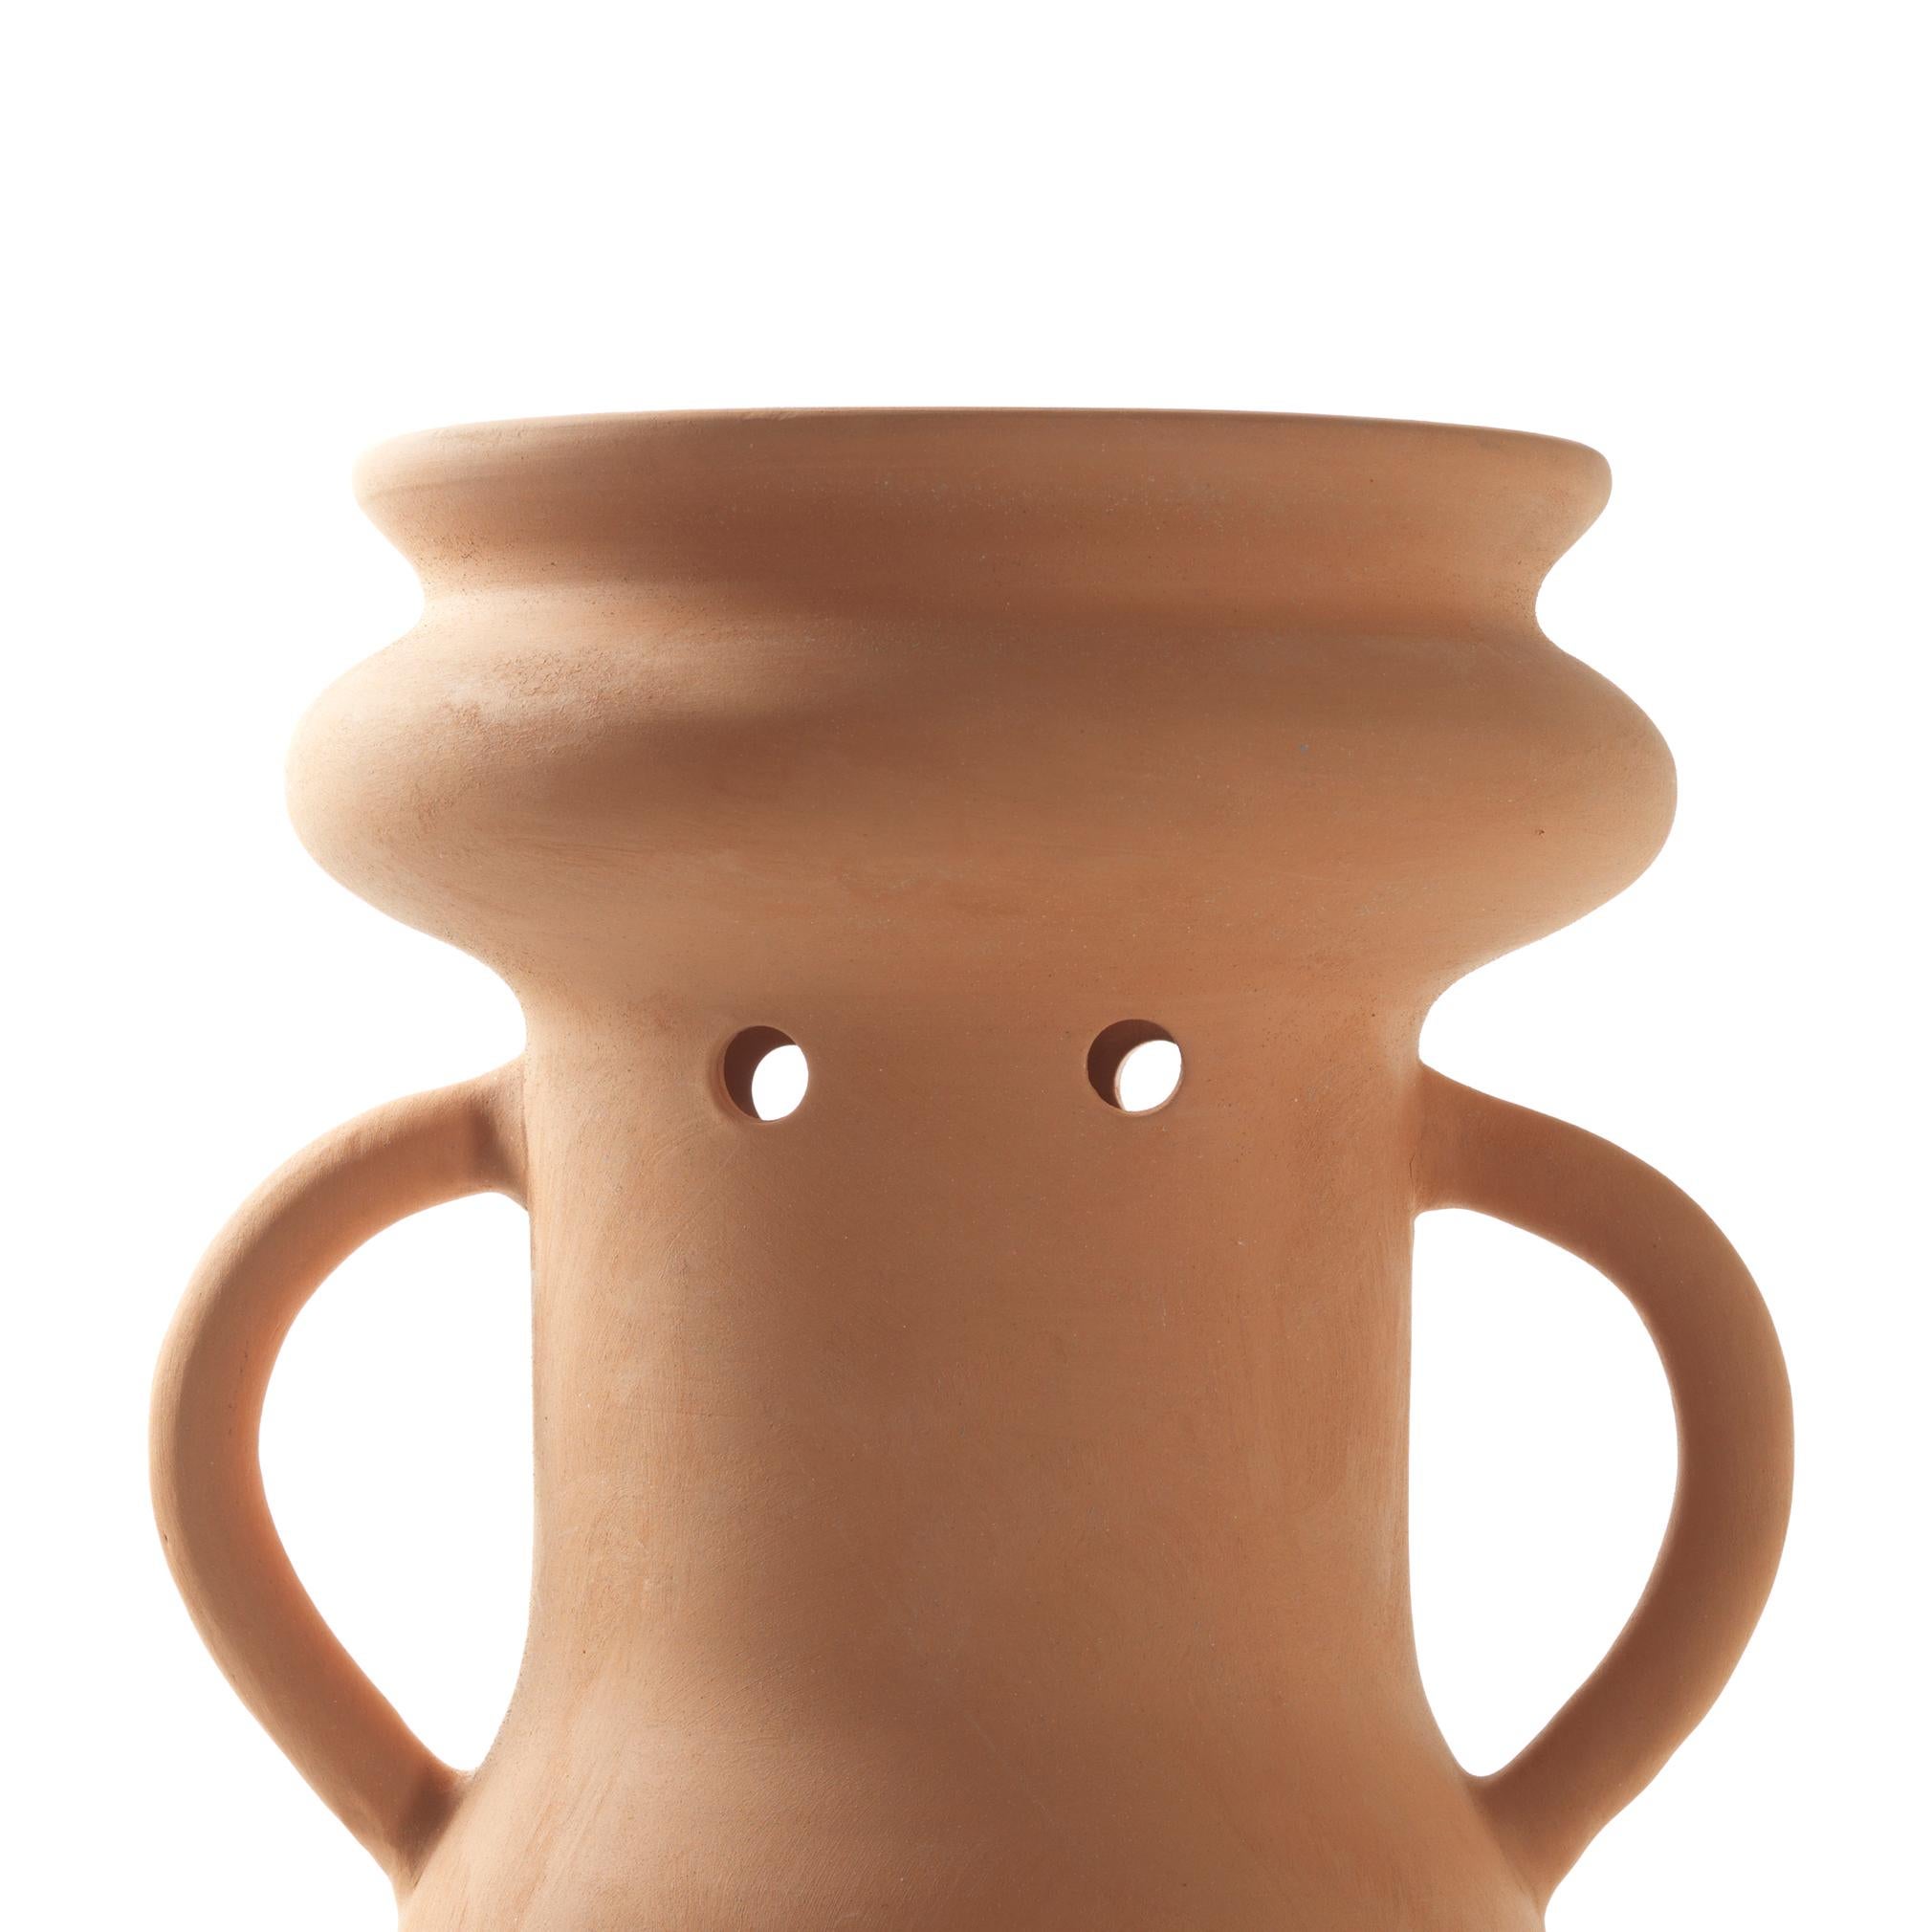 Gardenias vase nº 4 by Jaime Hayon.

Hand-turned terracota withan impermeable treatment.